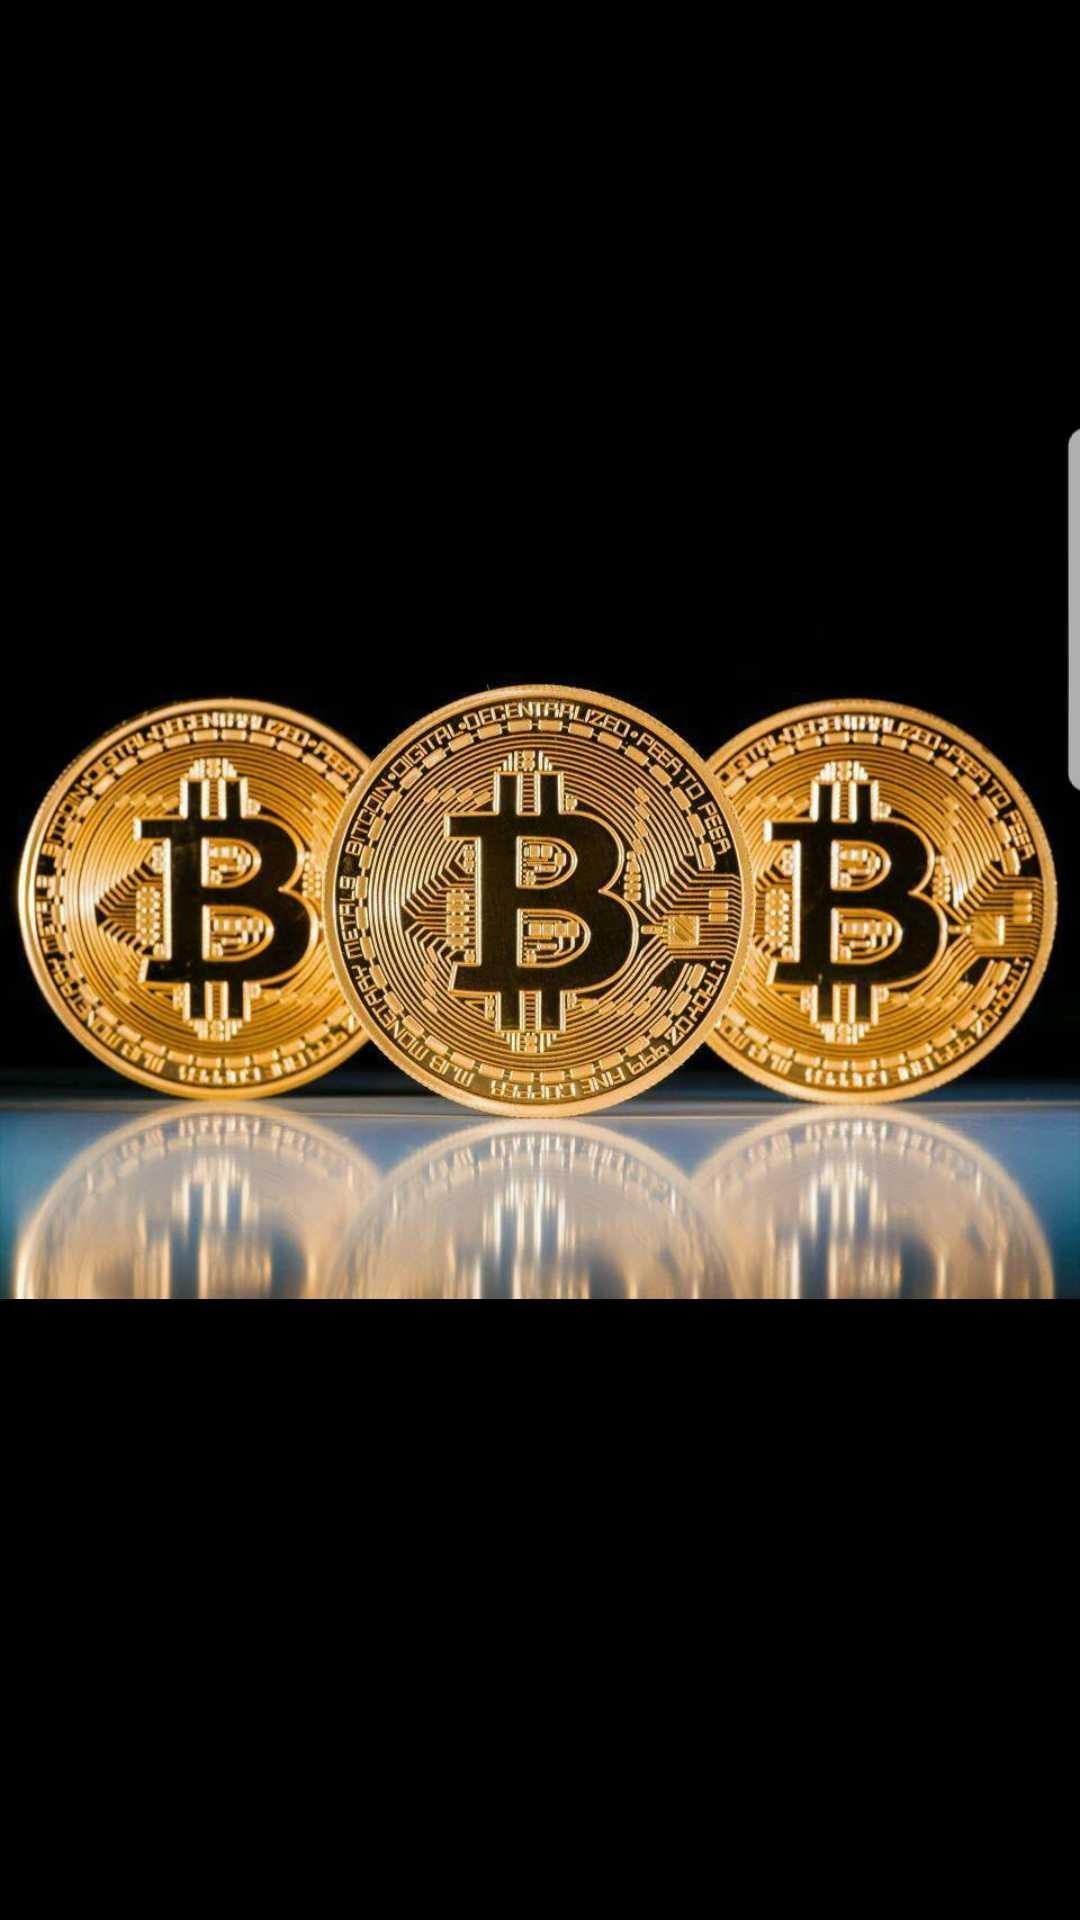 Can i buy bitcoin directly how i can buy cryptocurrency without authentication